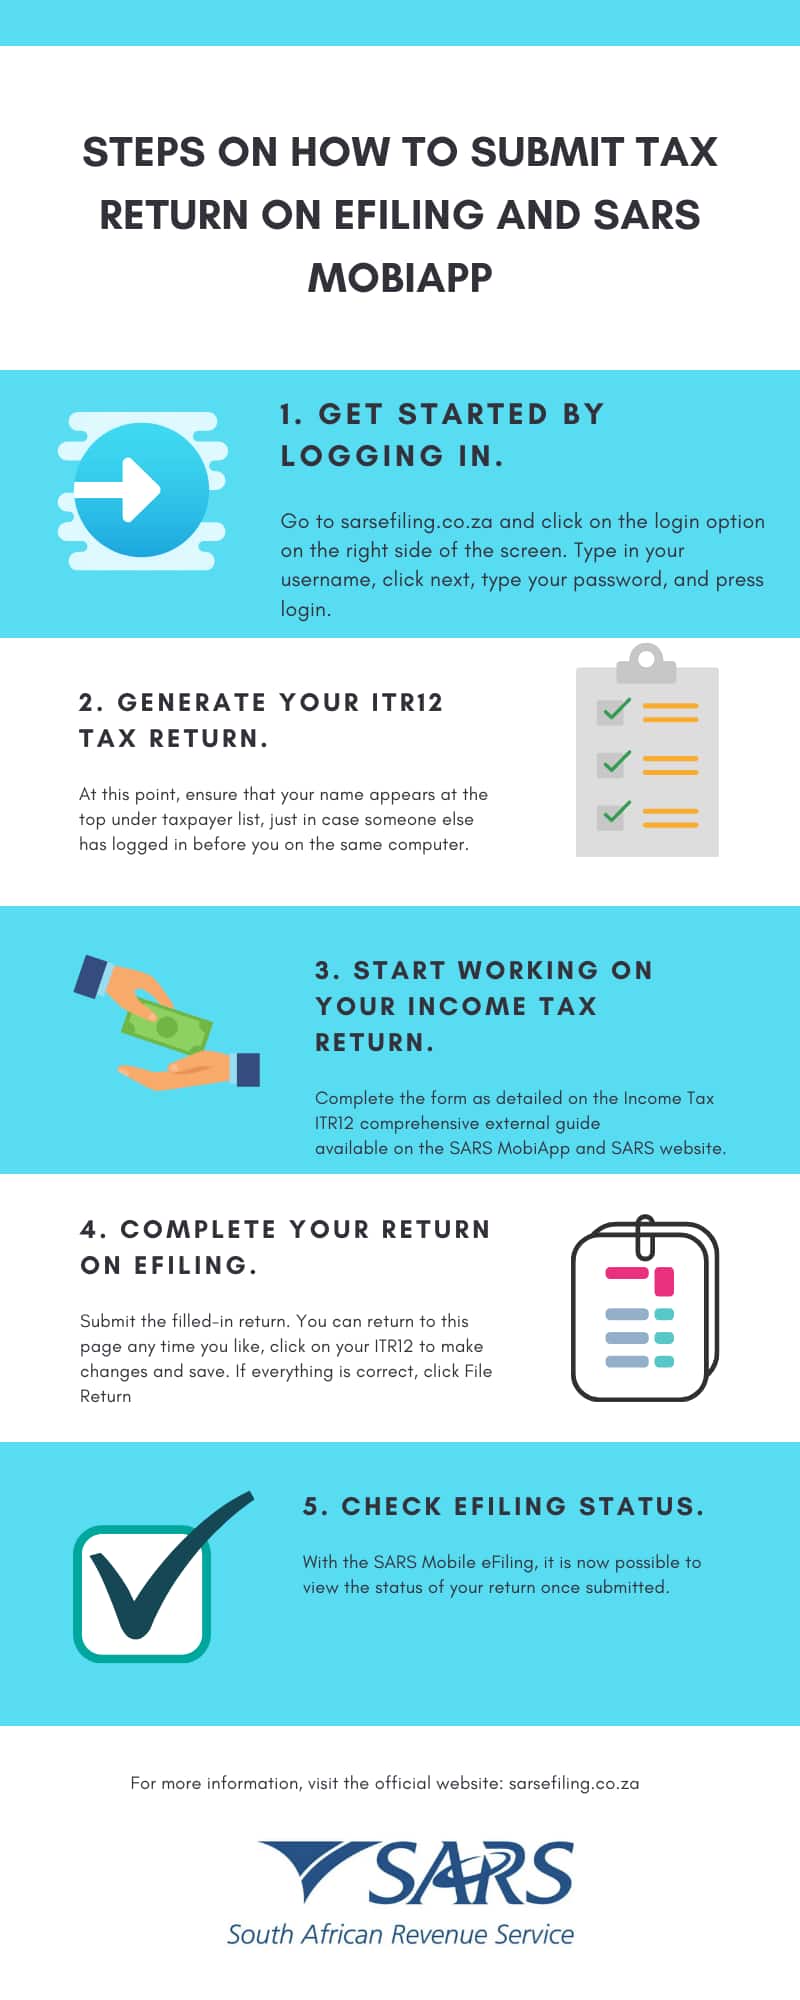 SARS eFiling 2020: Steps on how to file your tax returns using eFiling